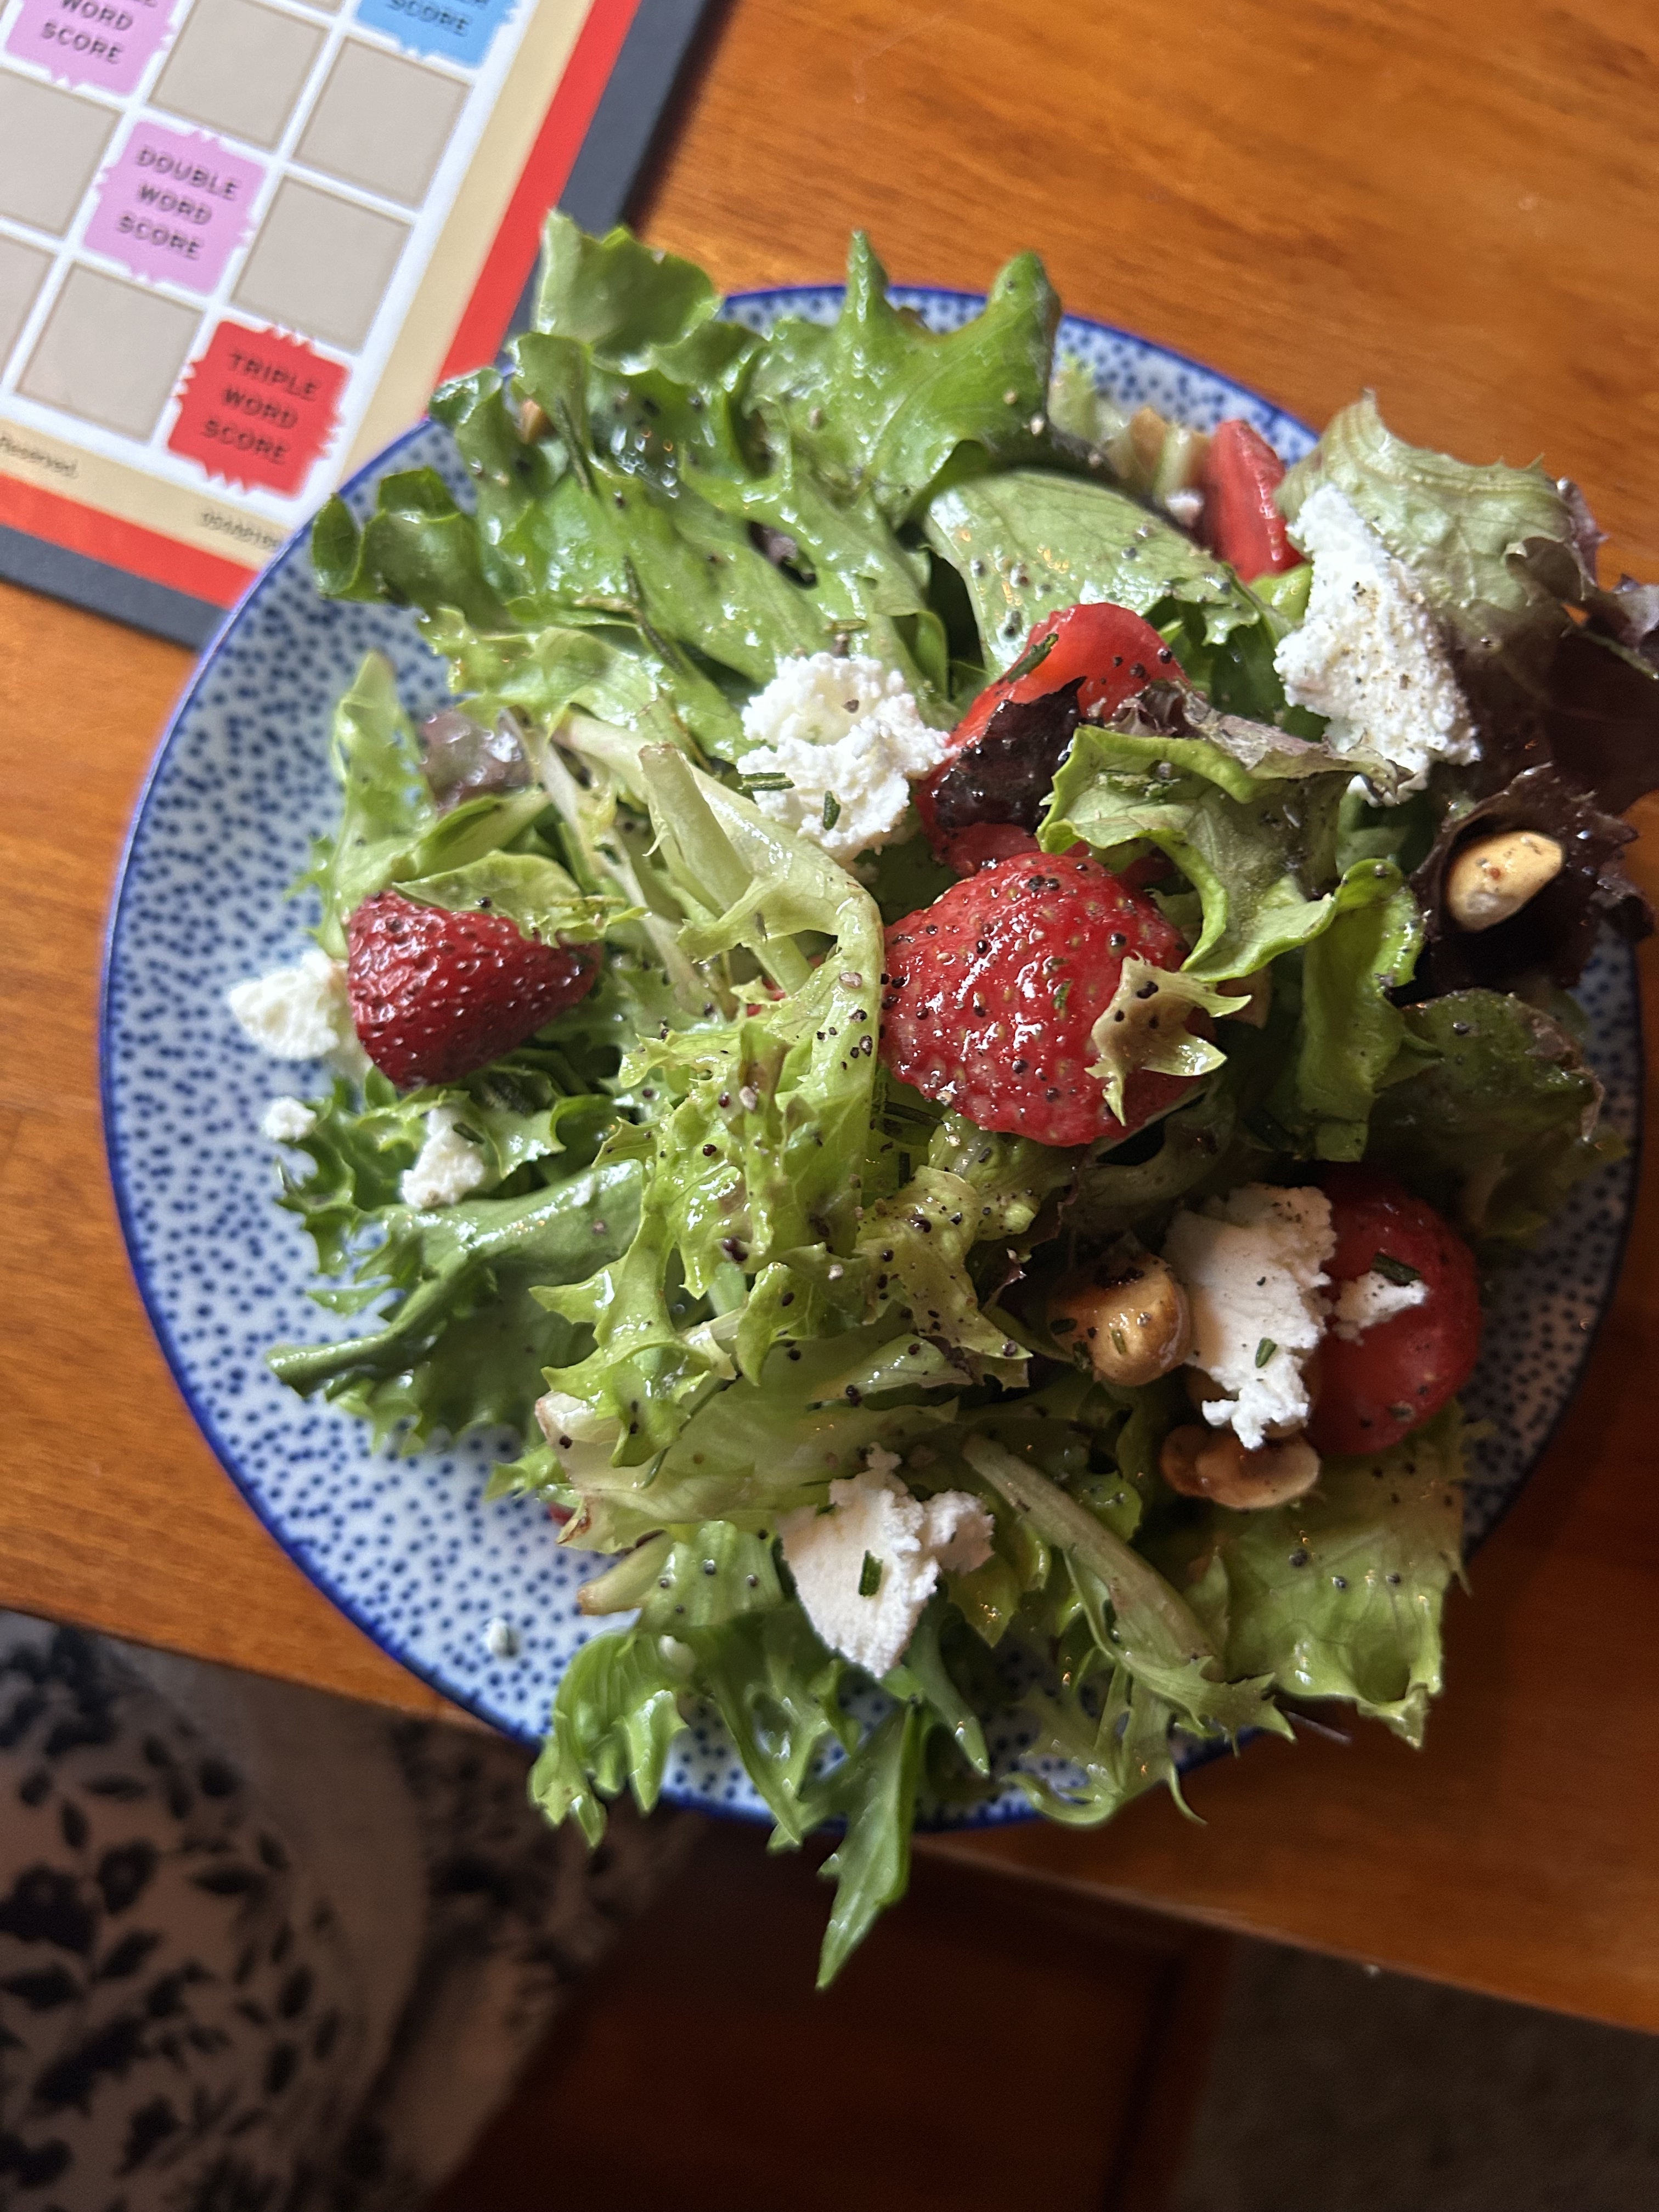 A salad with strawberries, ricotta, and hazelnuts.